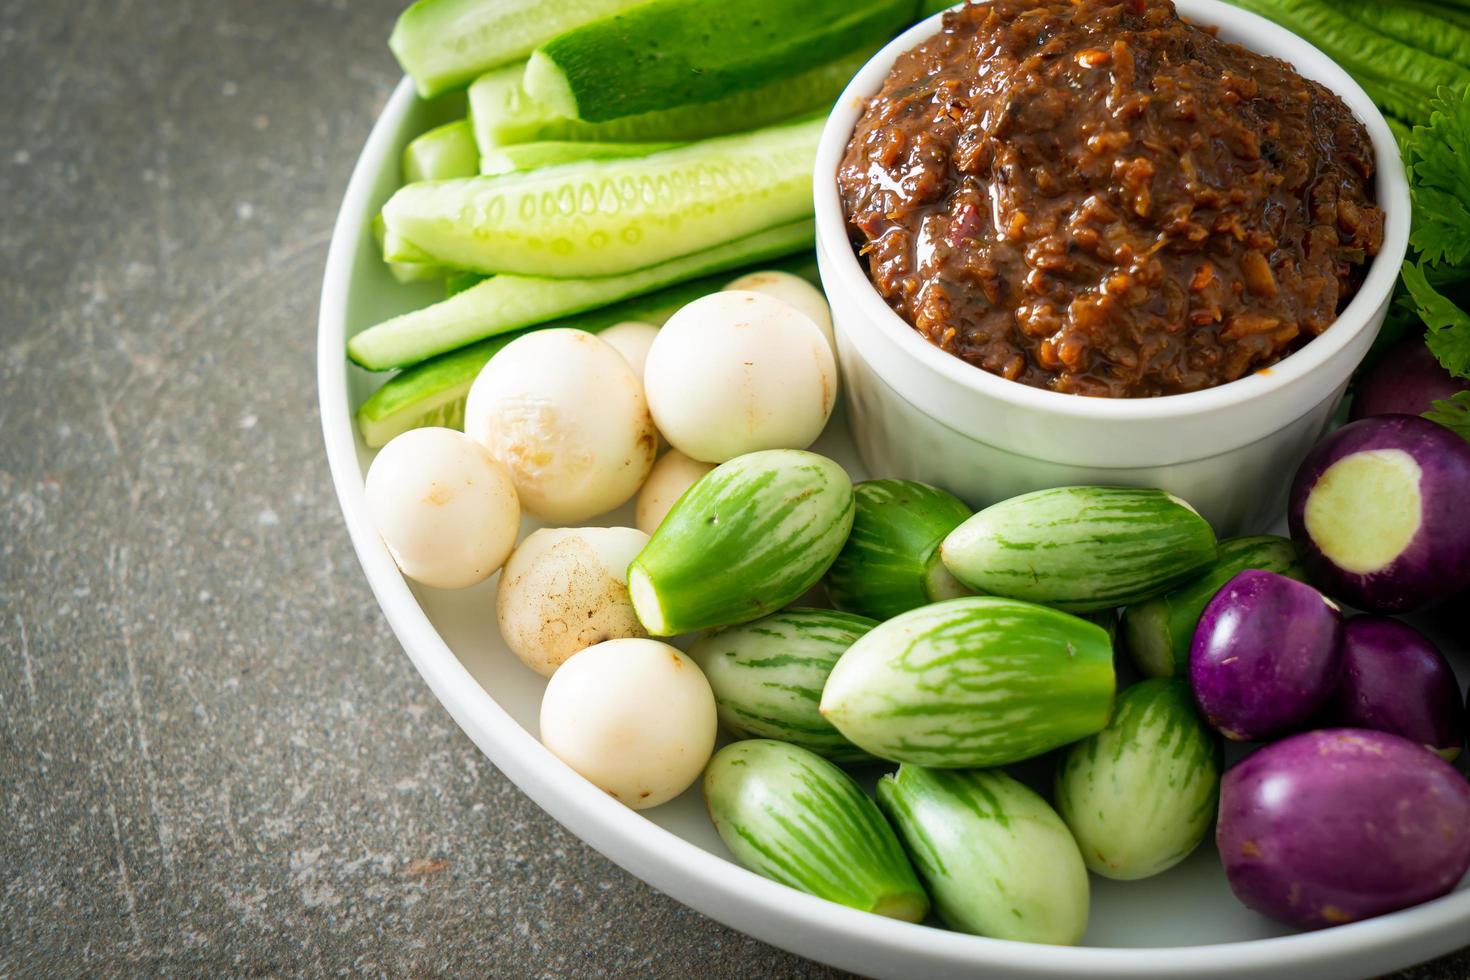 Fermented Fish Chili Paste with Fresh Vegetables photo